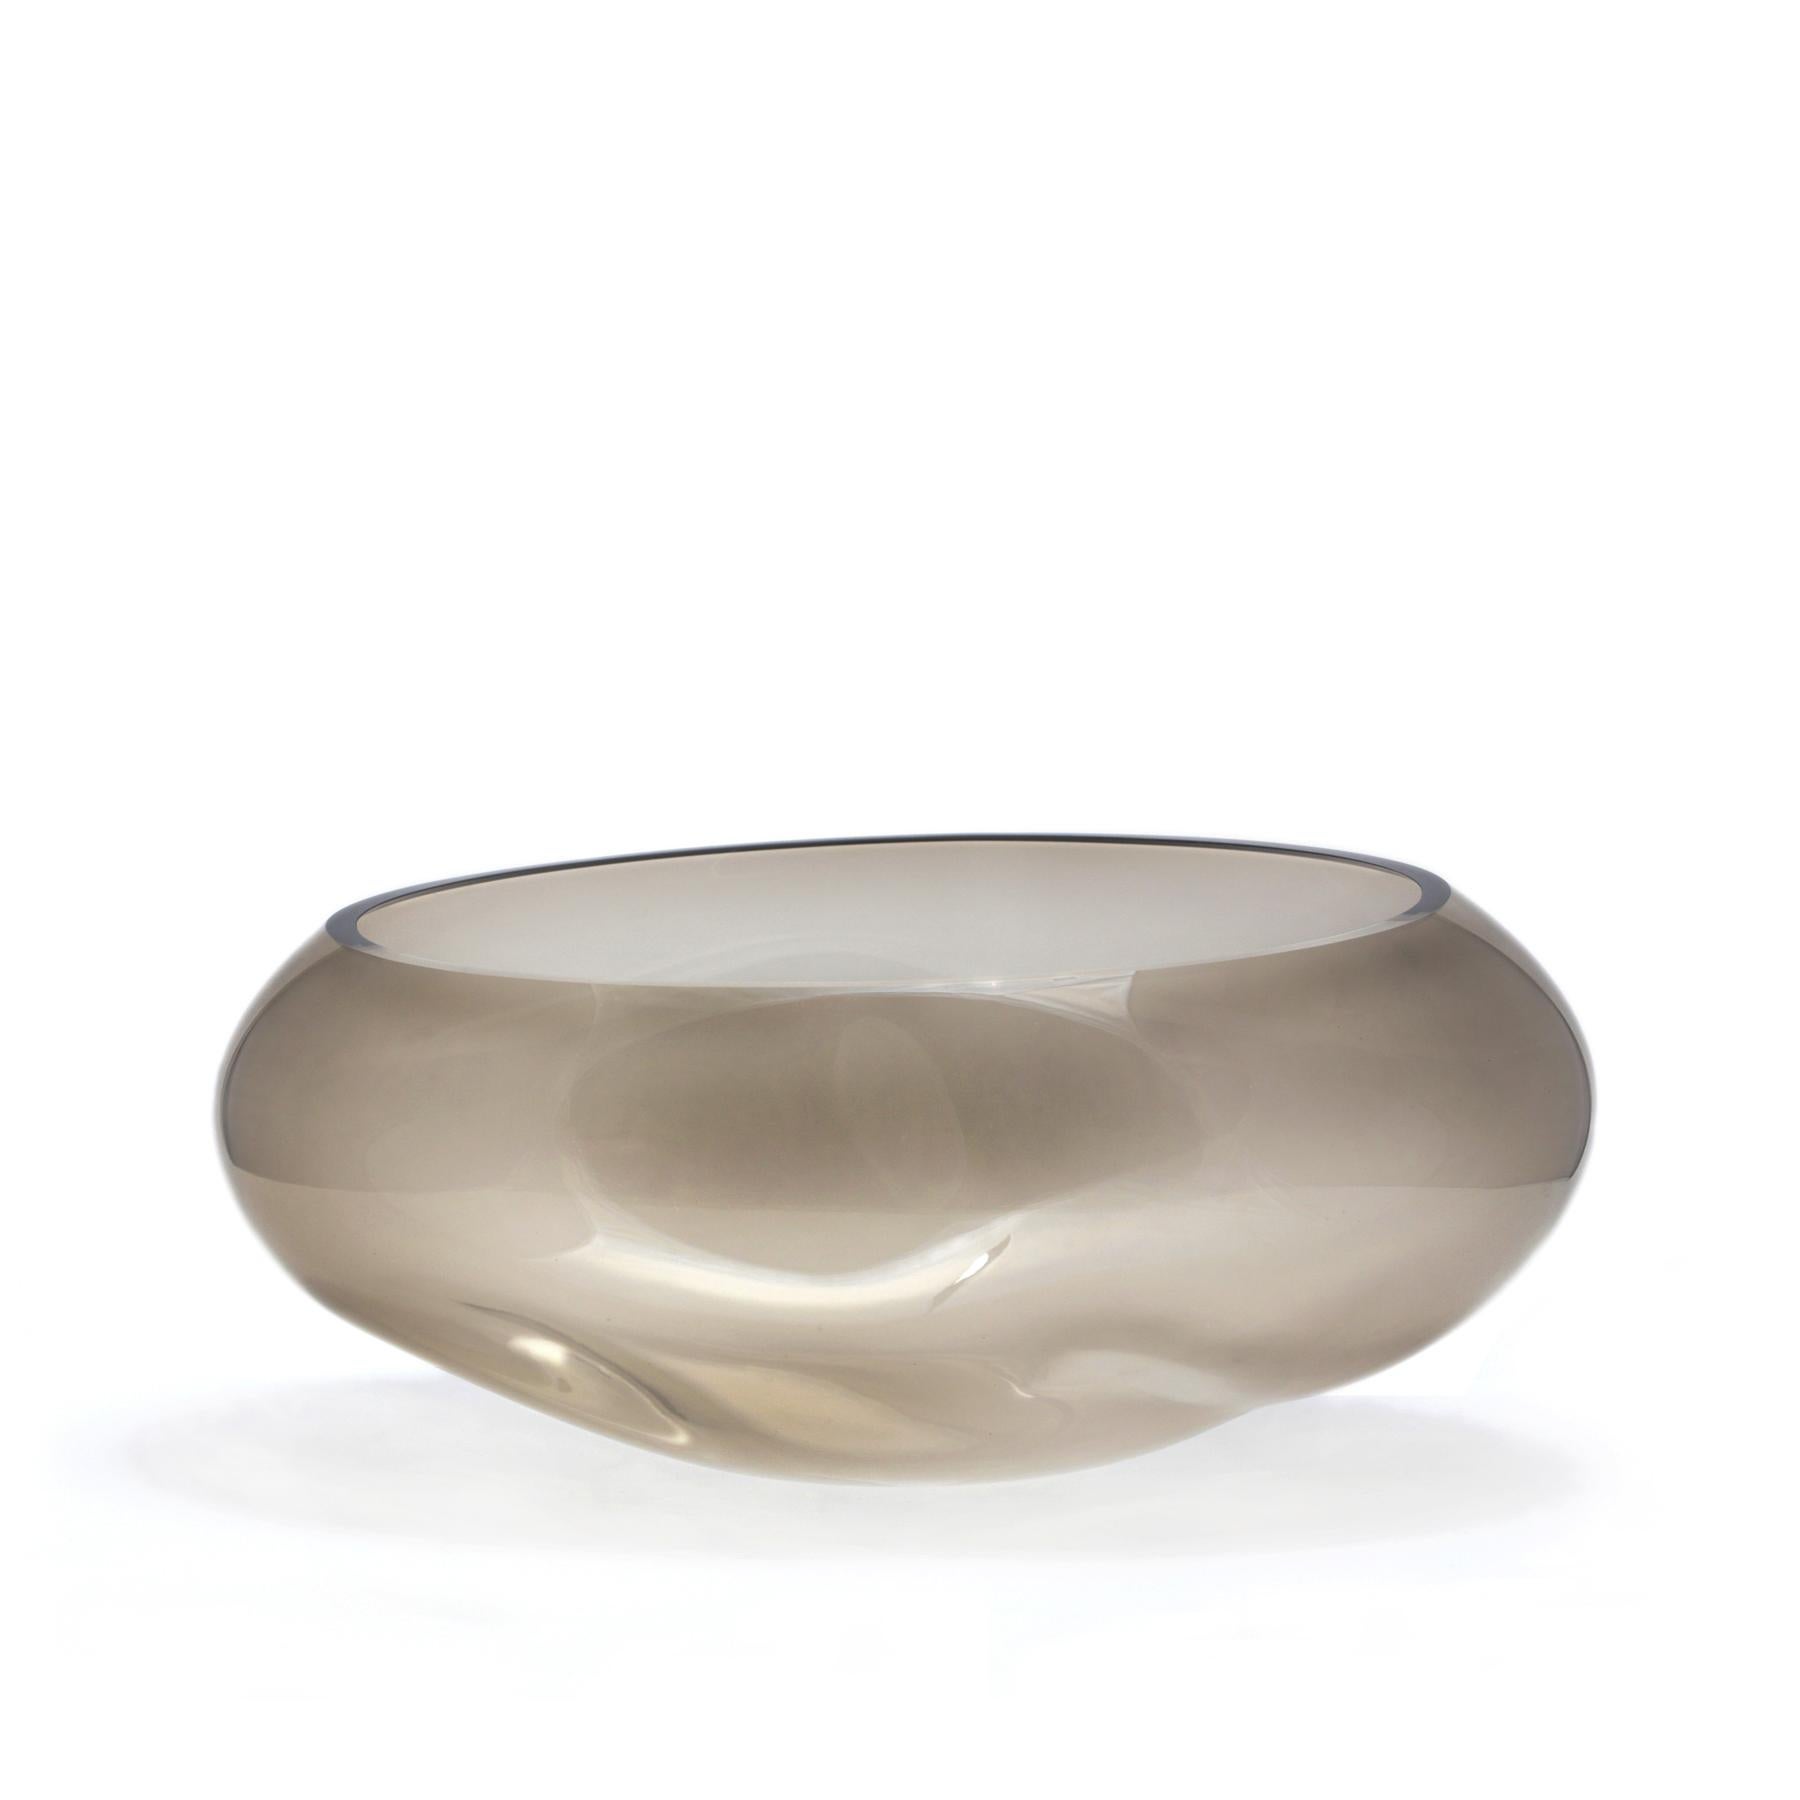 Supernova I silver smoke M bowl + vase by ELOA
No UL listed 
Material: glass
Dimensions: D24 x W37 x H17 cm
Also available in different colours and dimensions.

SUPERNOVA is a rare and magical visual phenomenon that manifests itself as a quick